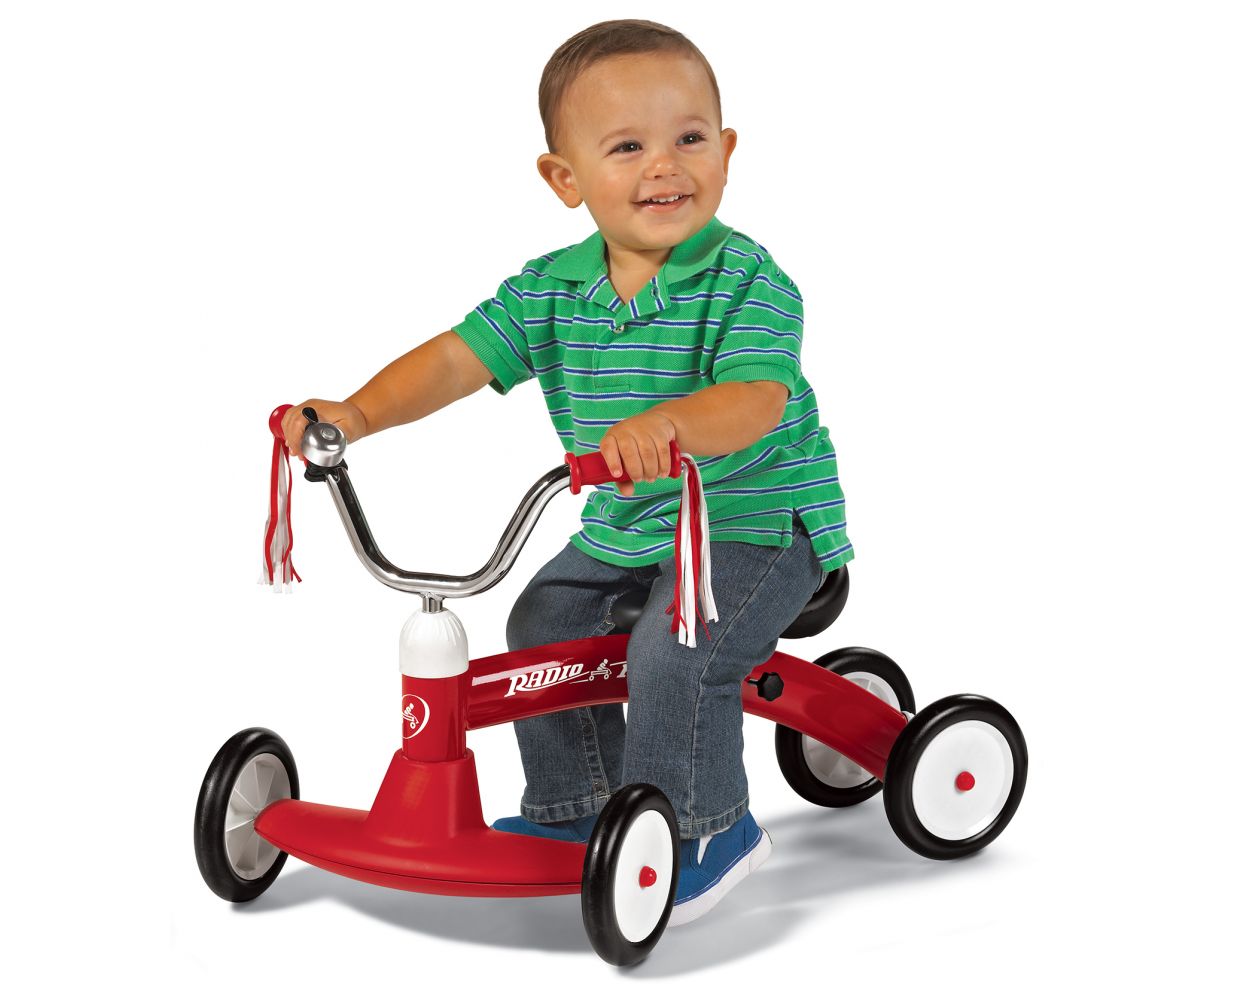 The Radio Flyer Scoot-About